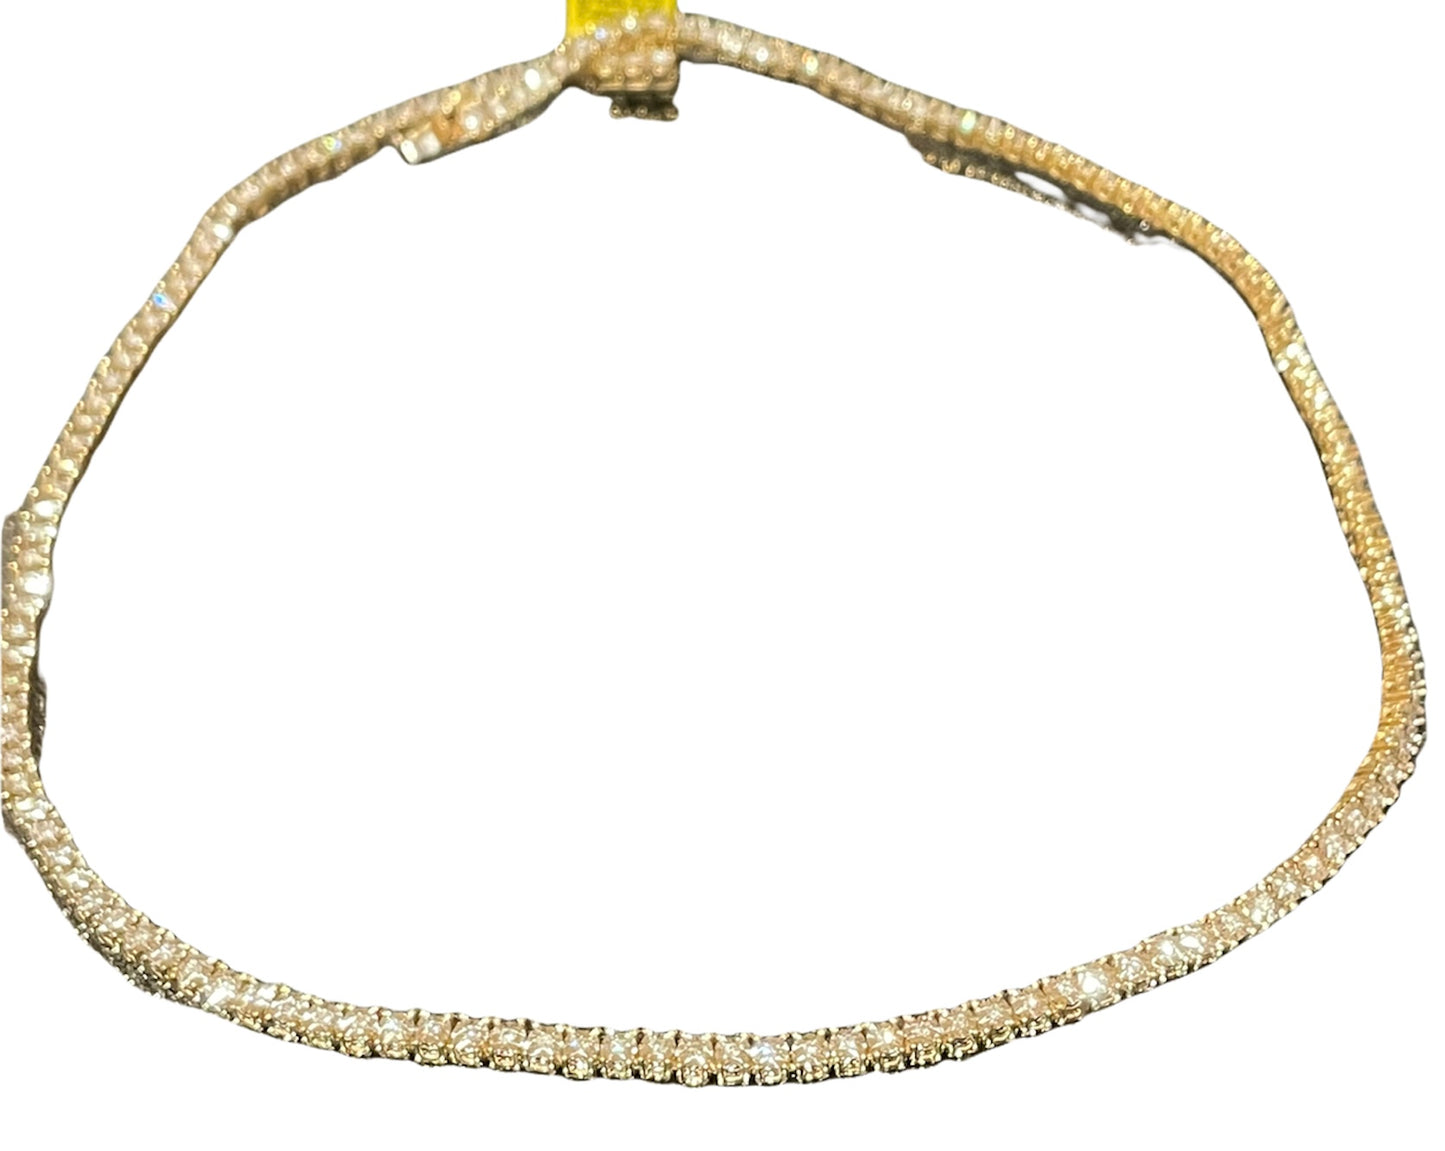 Diamond Tennis Necklace in 14KT Yellow Gold - 1.47 Carats